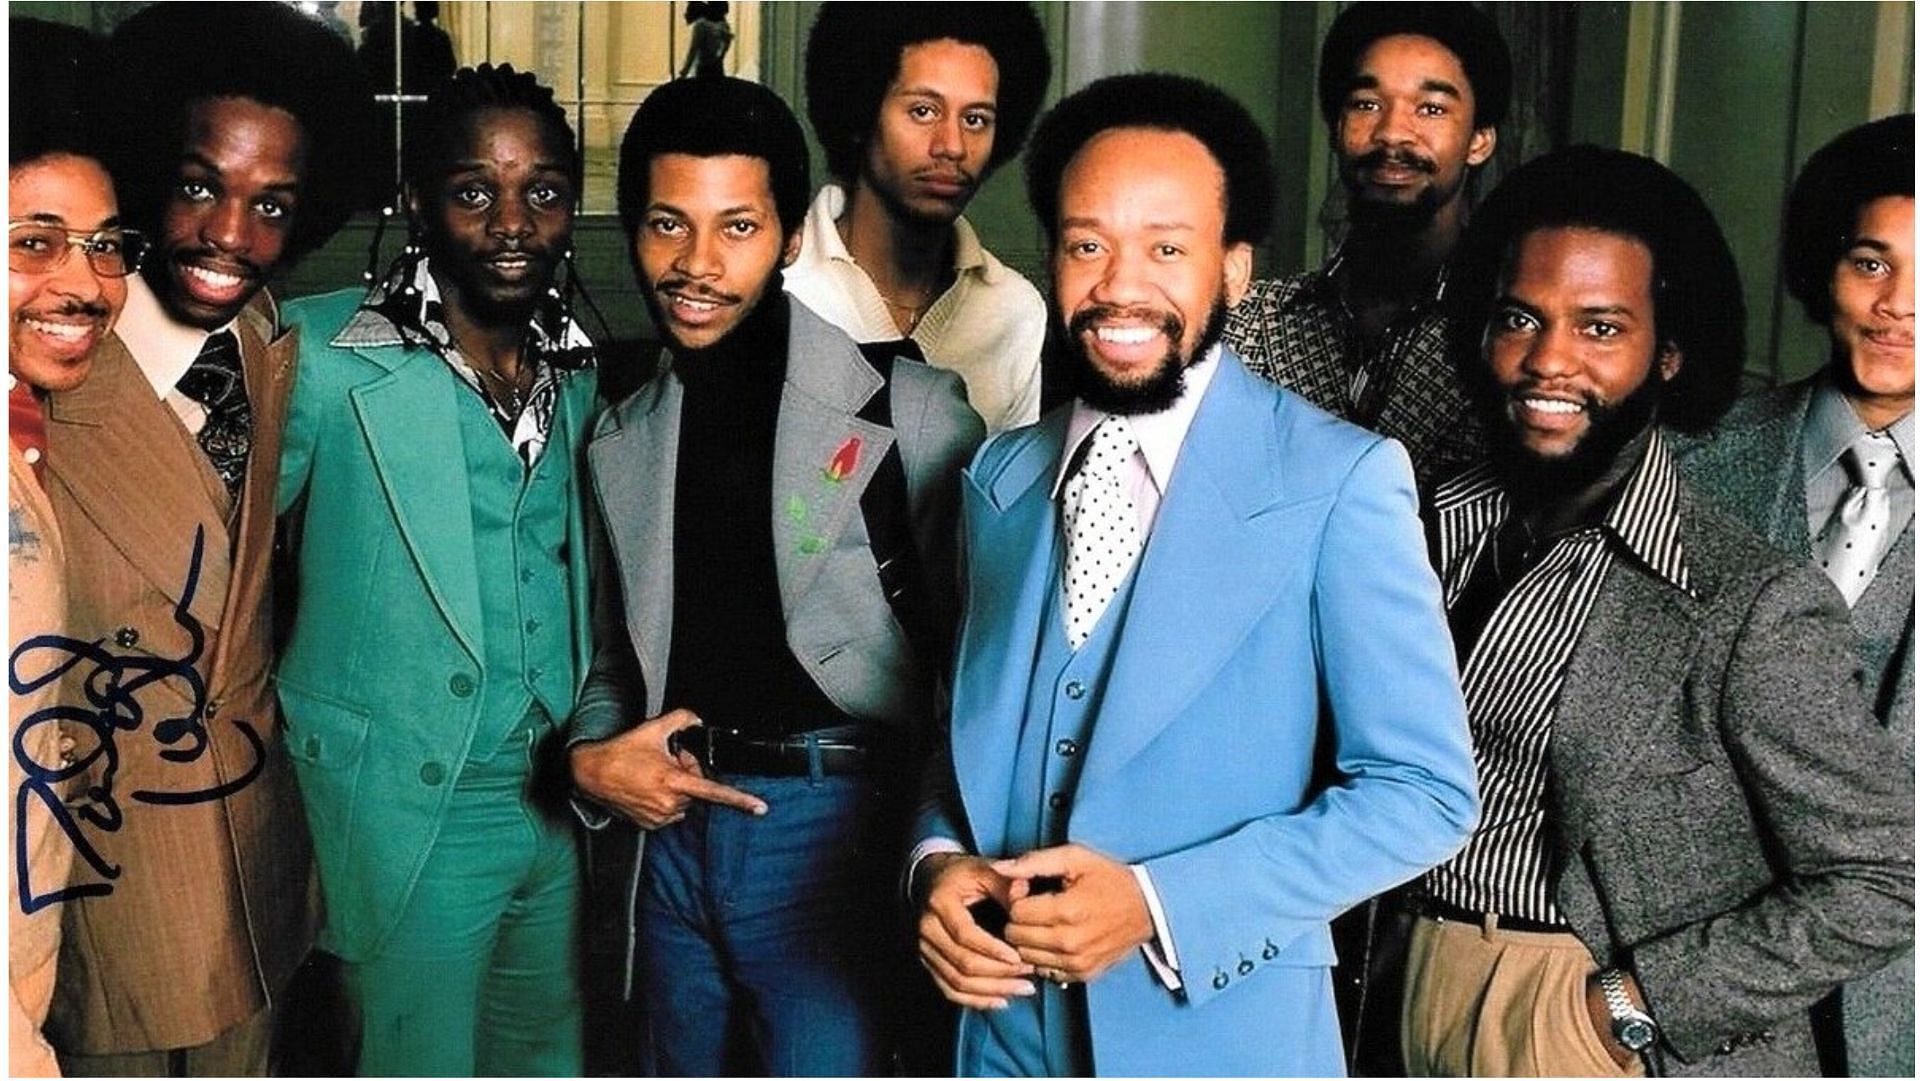 Fred White was a member of Earth, Wind &amp; Fire (Image via ColdPieceCITY/Twitter)